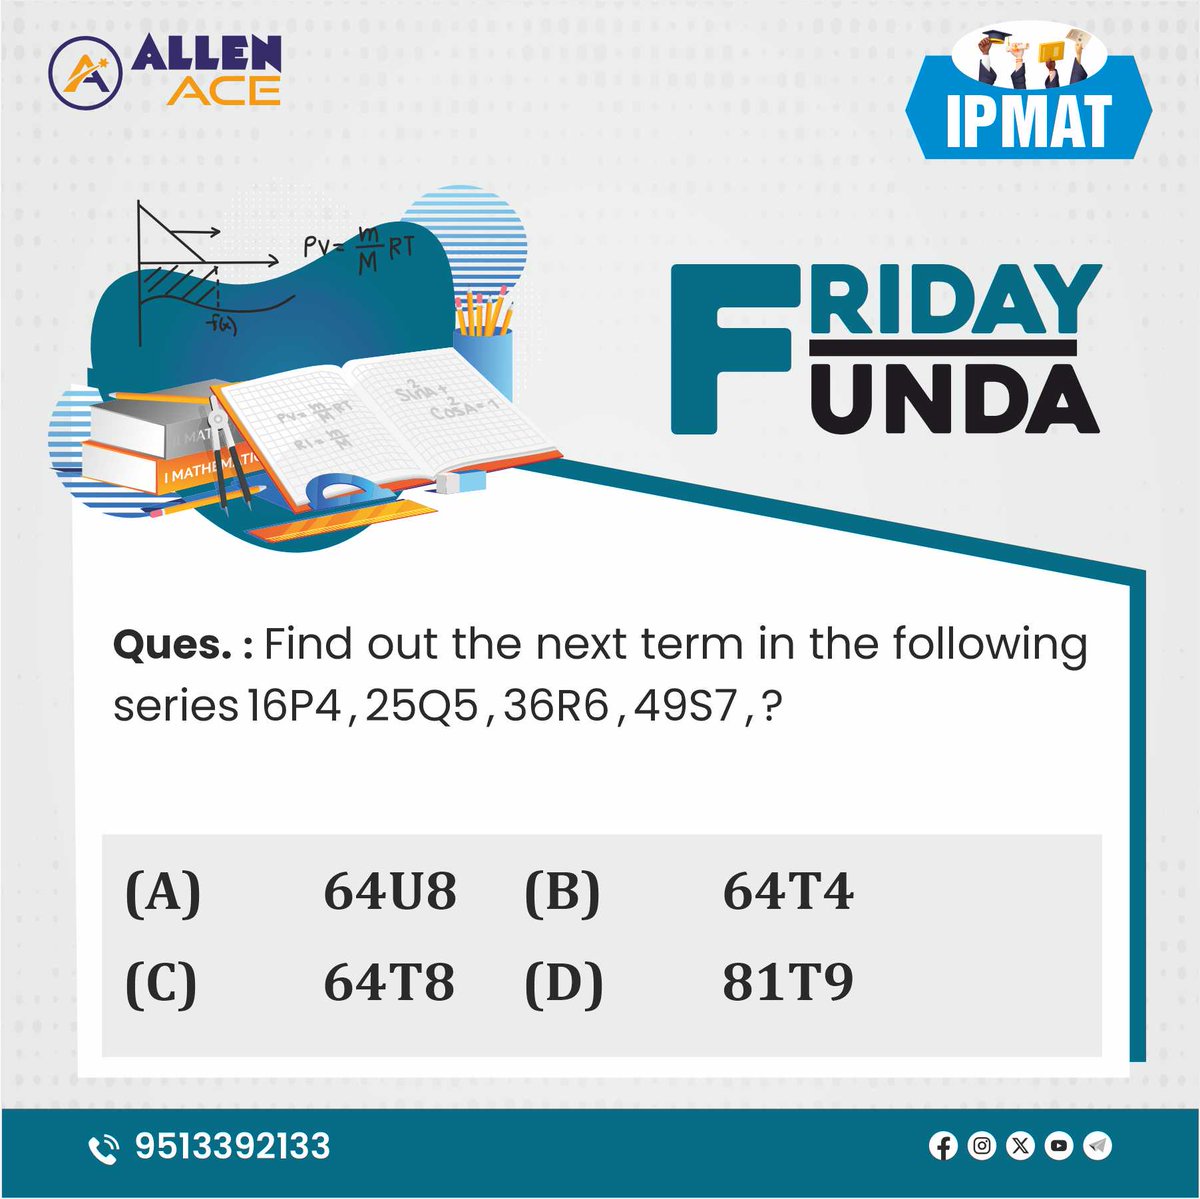 📍 Feeling Brainy? 🧠

✅ Can you ACE this Friday Funda Problem?

👉🏻 Answer this Friday Funda Math question & share the answer in the comments.

🔑📖✨ Don't forget to check the correct answer at 7 PM.

#logicalreasoning #logicalreasoningquiz #puzzle #Analyticreasoning #Allenace